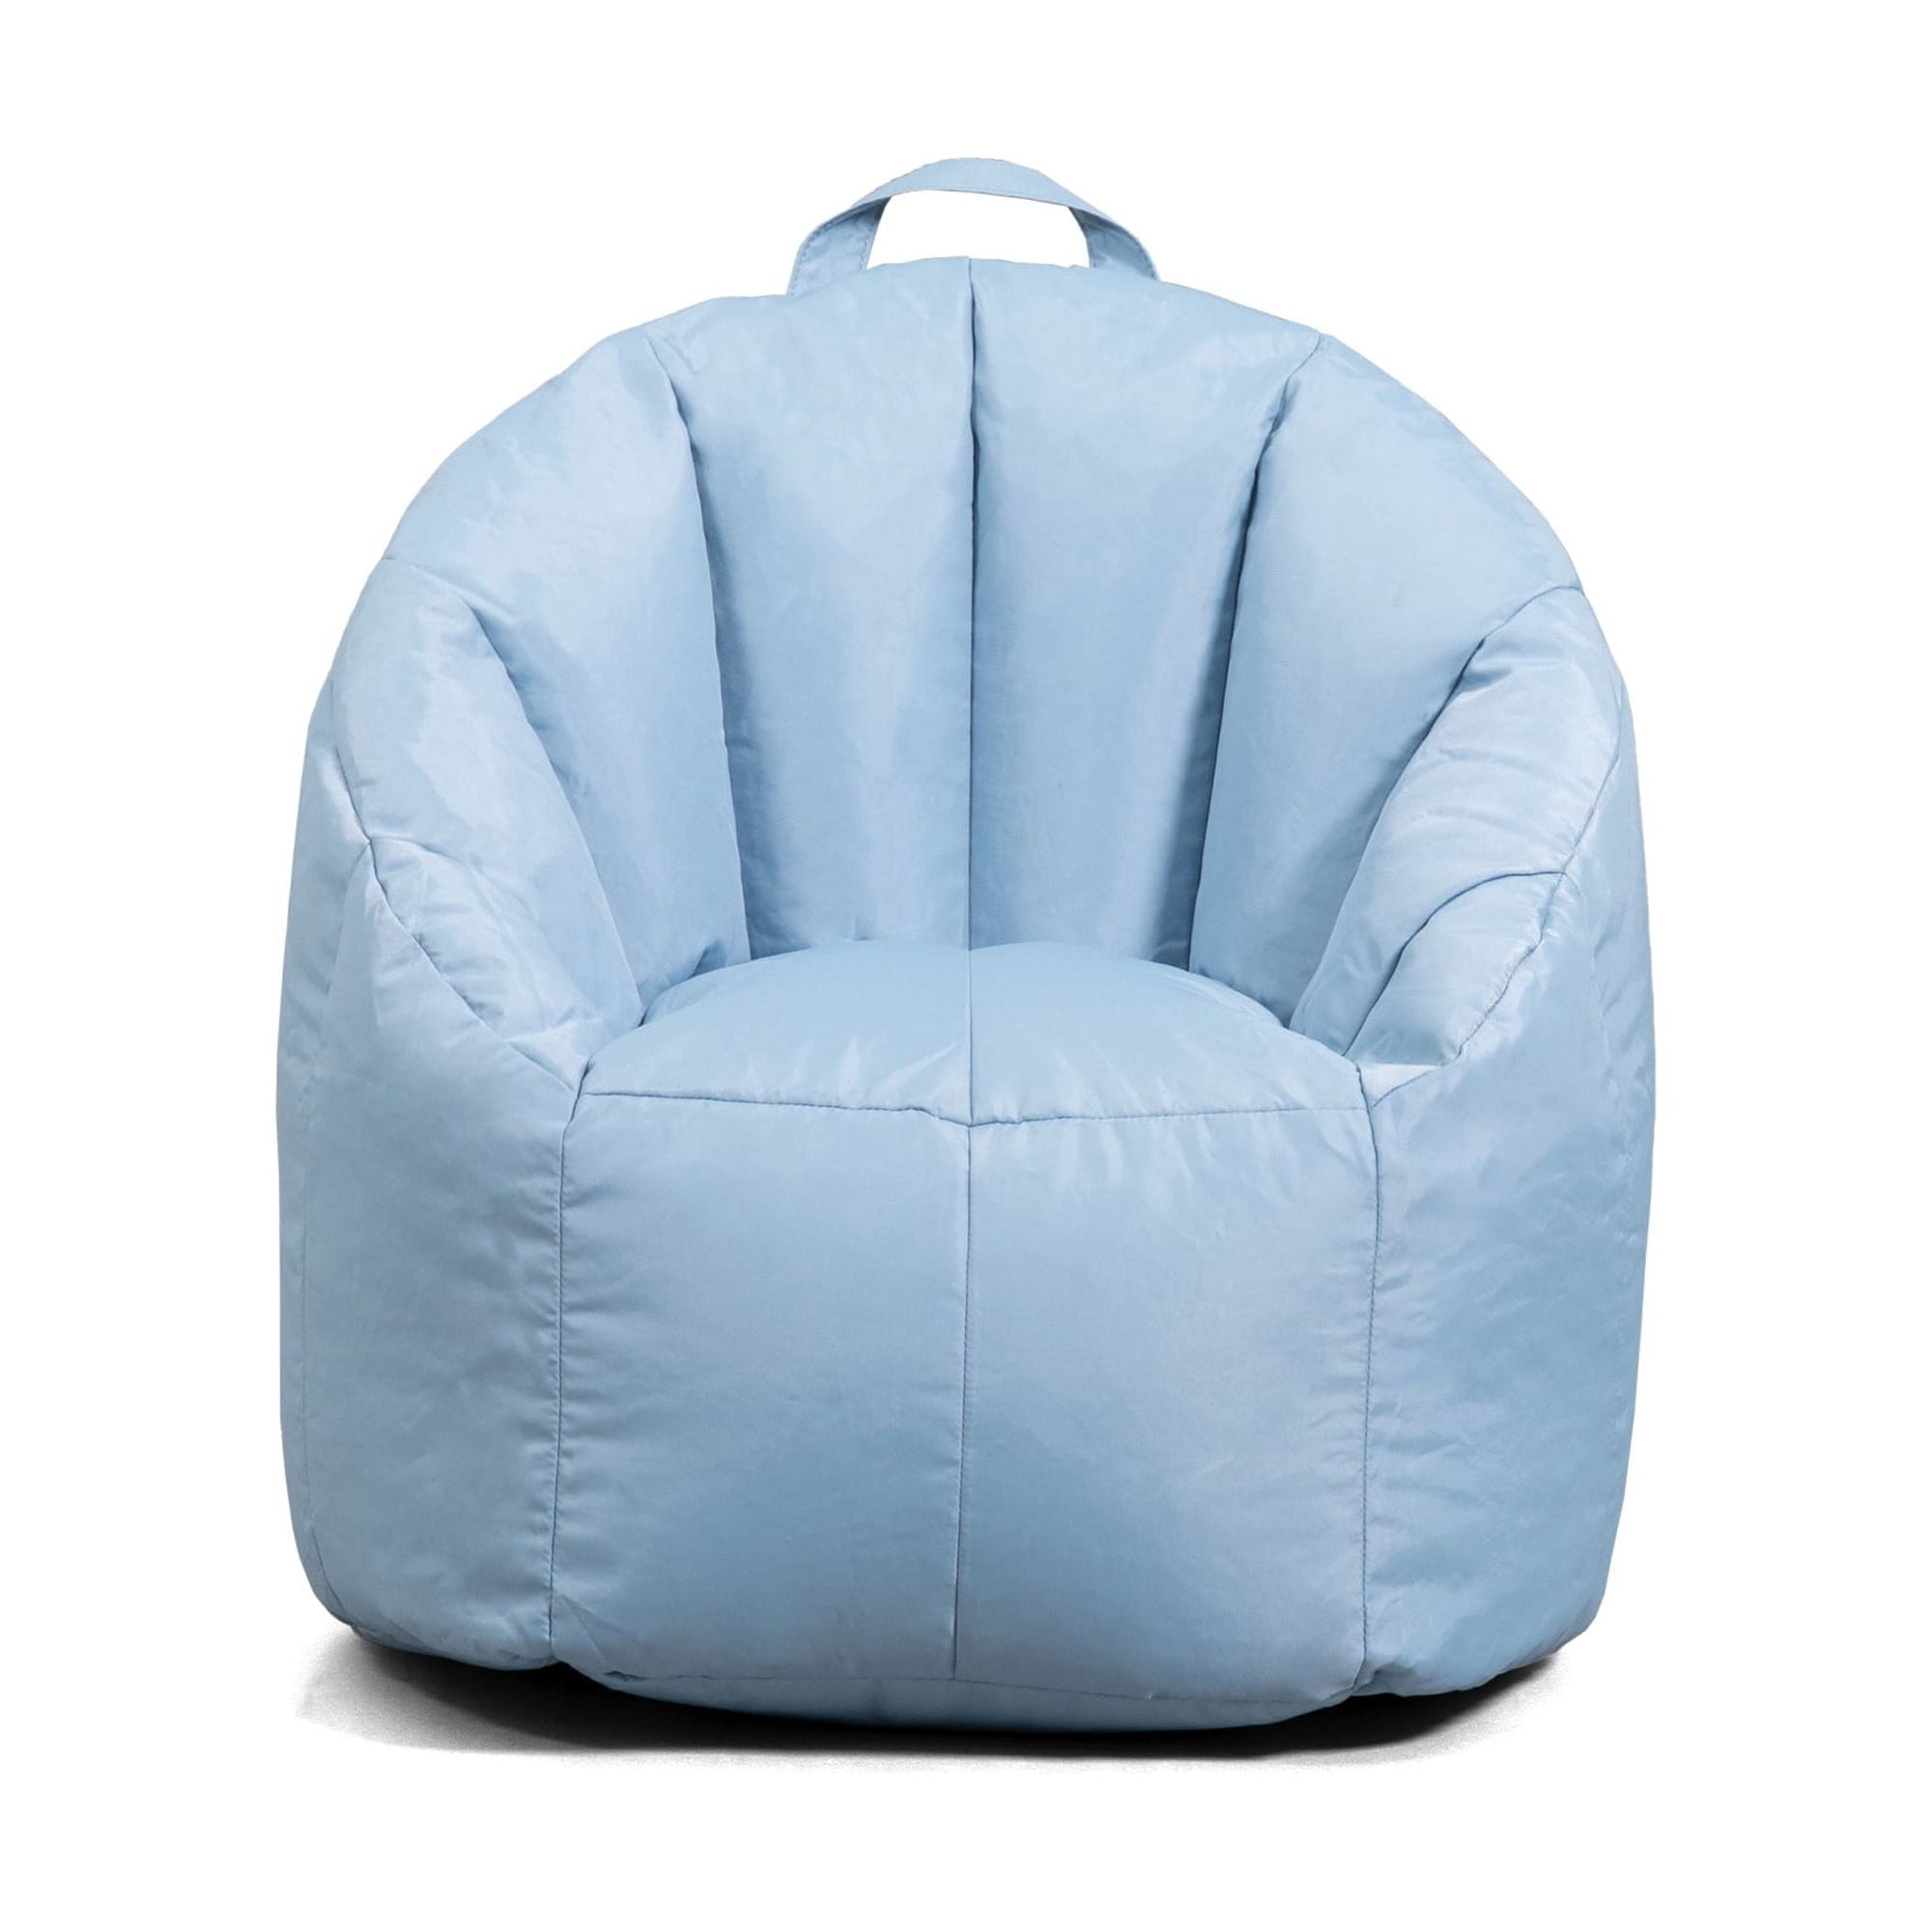  HDMLDP Giant Bean Bag Chair for Adults Kids Without Filling  Comfy Round Big Joe Beanbag Chairs Love Sack Covers for Bedroom Living  Room, 5FT, Sky Blue : Home & Kitchen